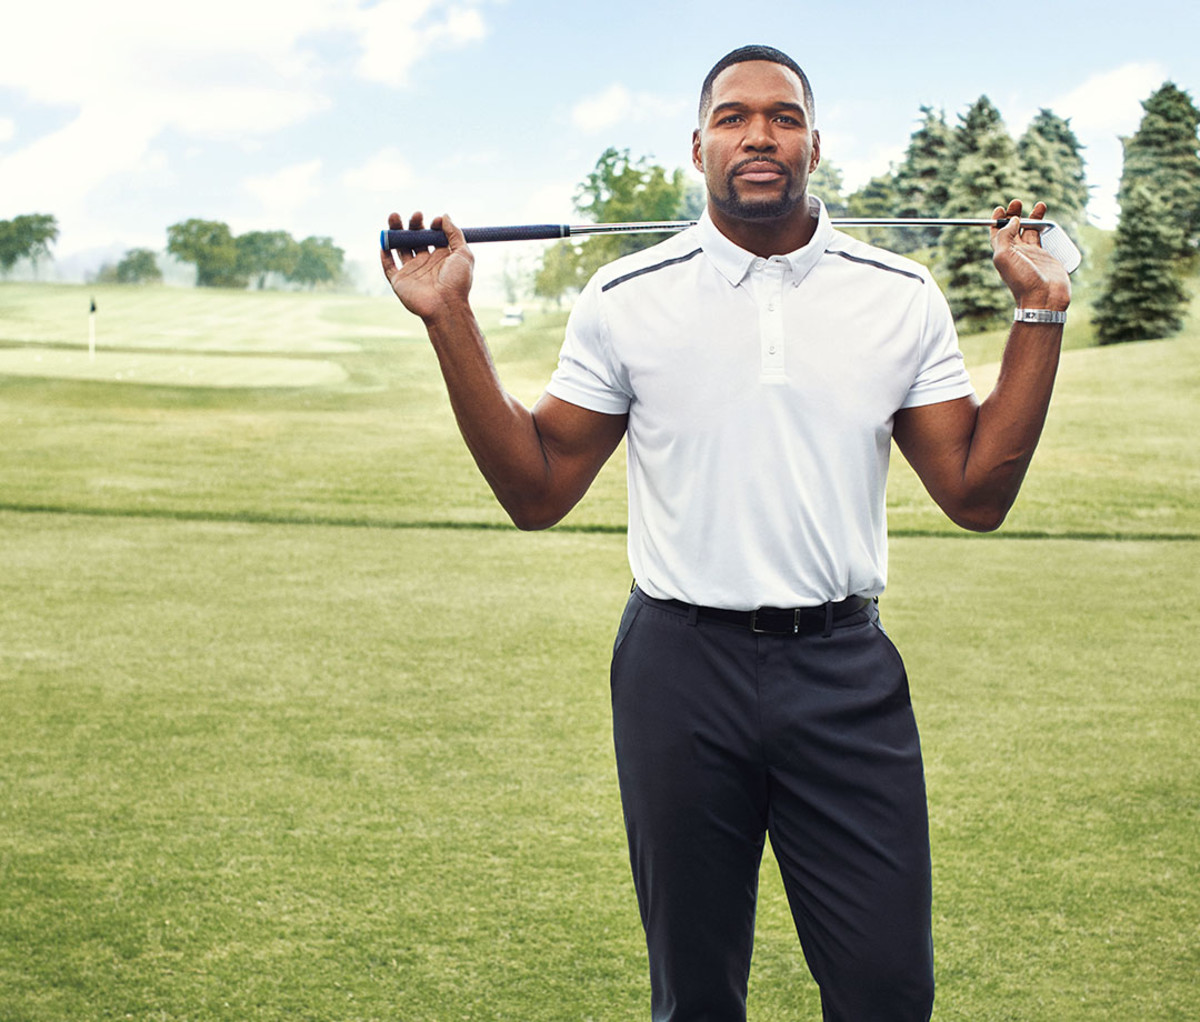 Strahan wears MSX Polo and Chino's by Michael Strahan. Watch by Rolex Daytona.